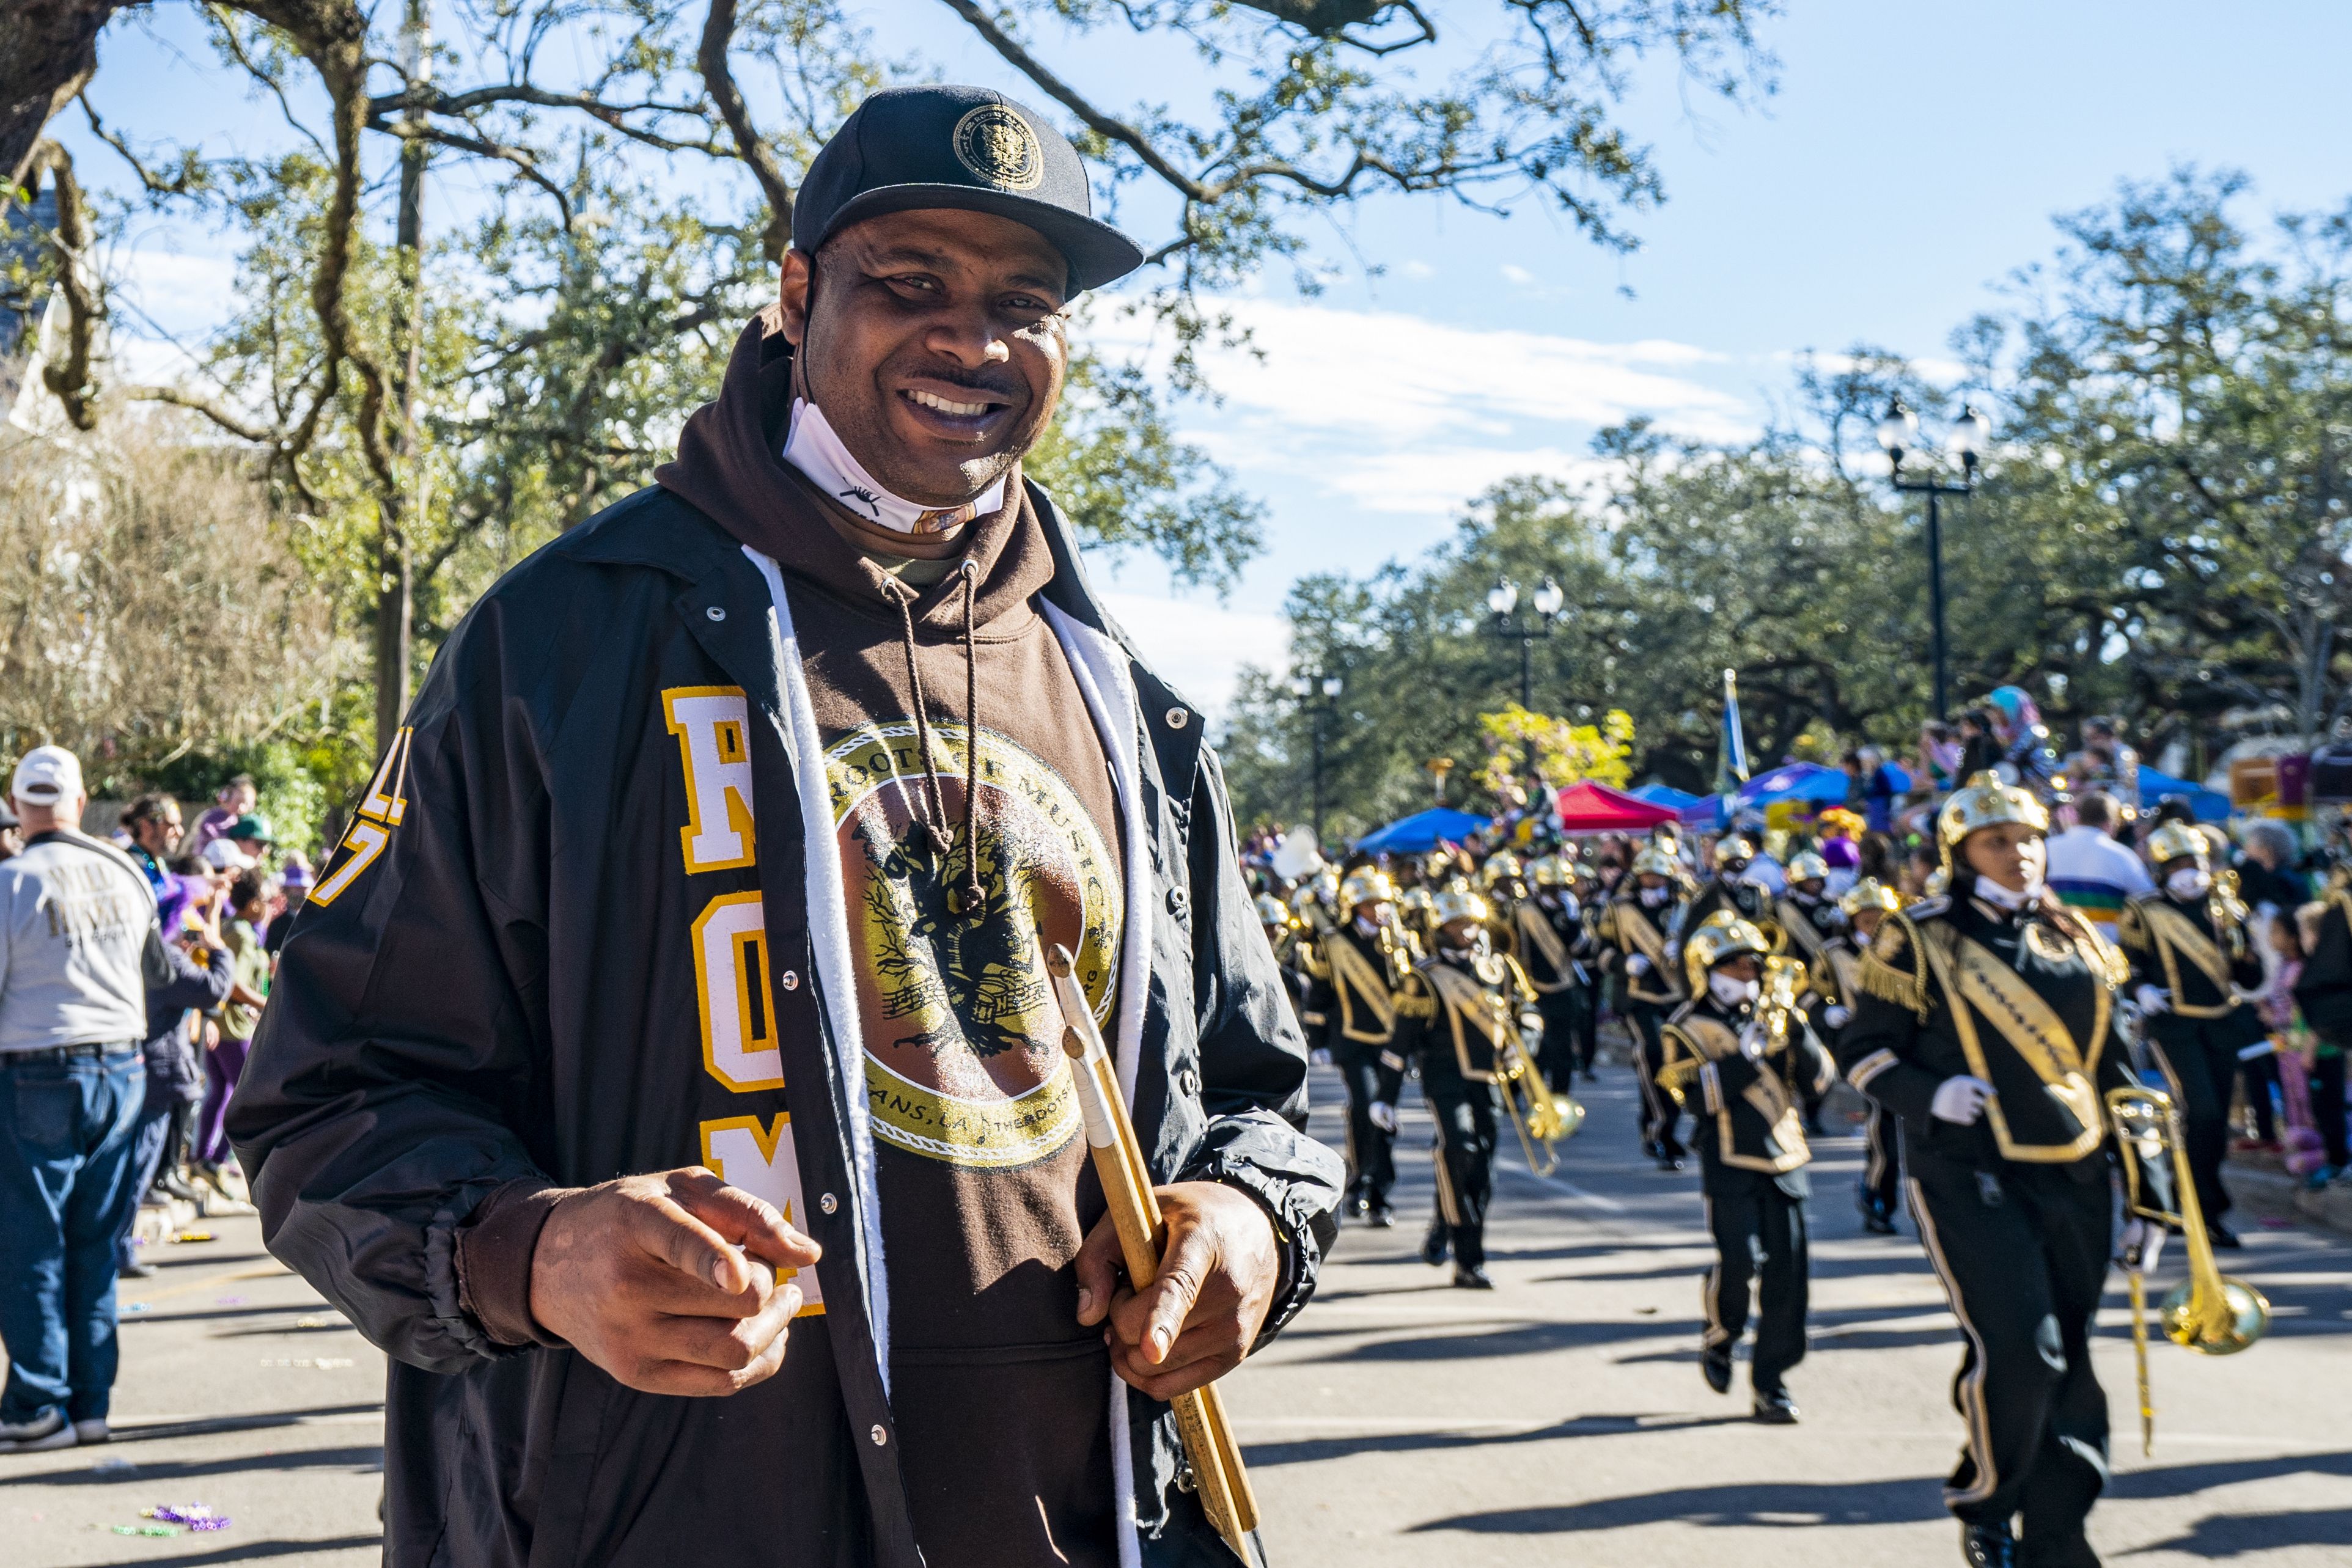 Photo shows Derrick Tabb, co-founder of The Roots of Music Marching Band, at a parade.